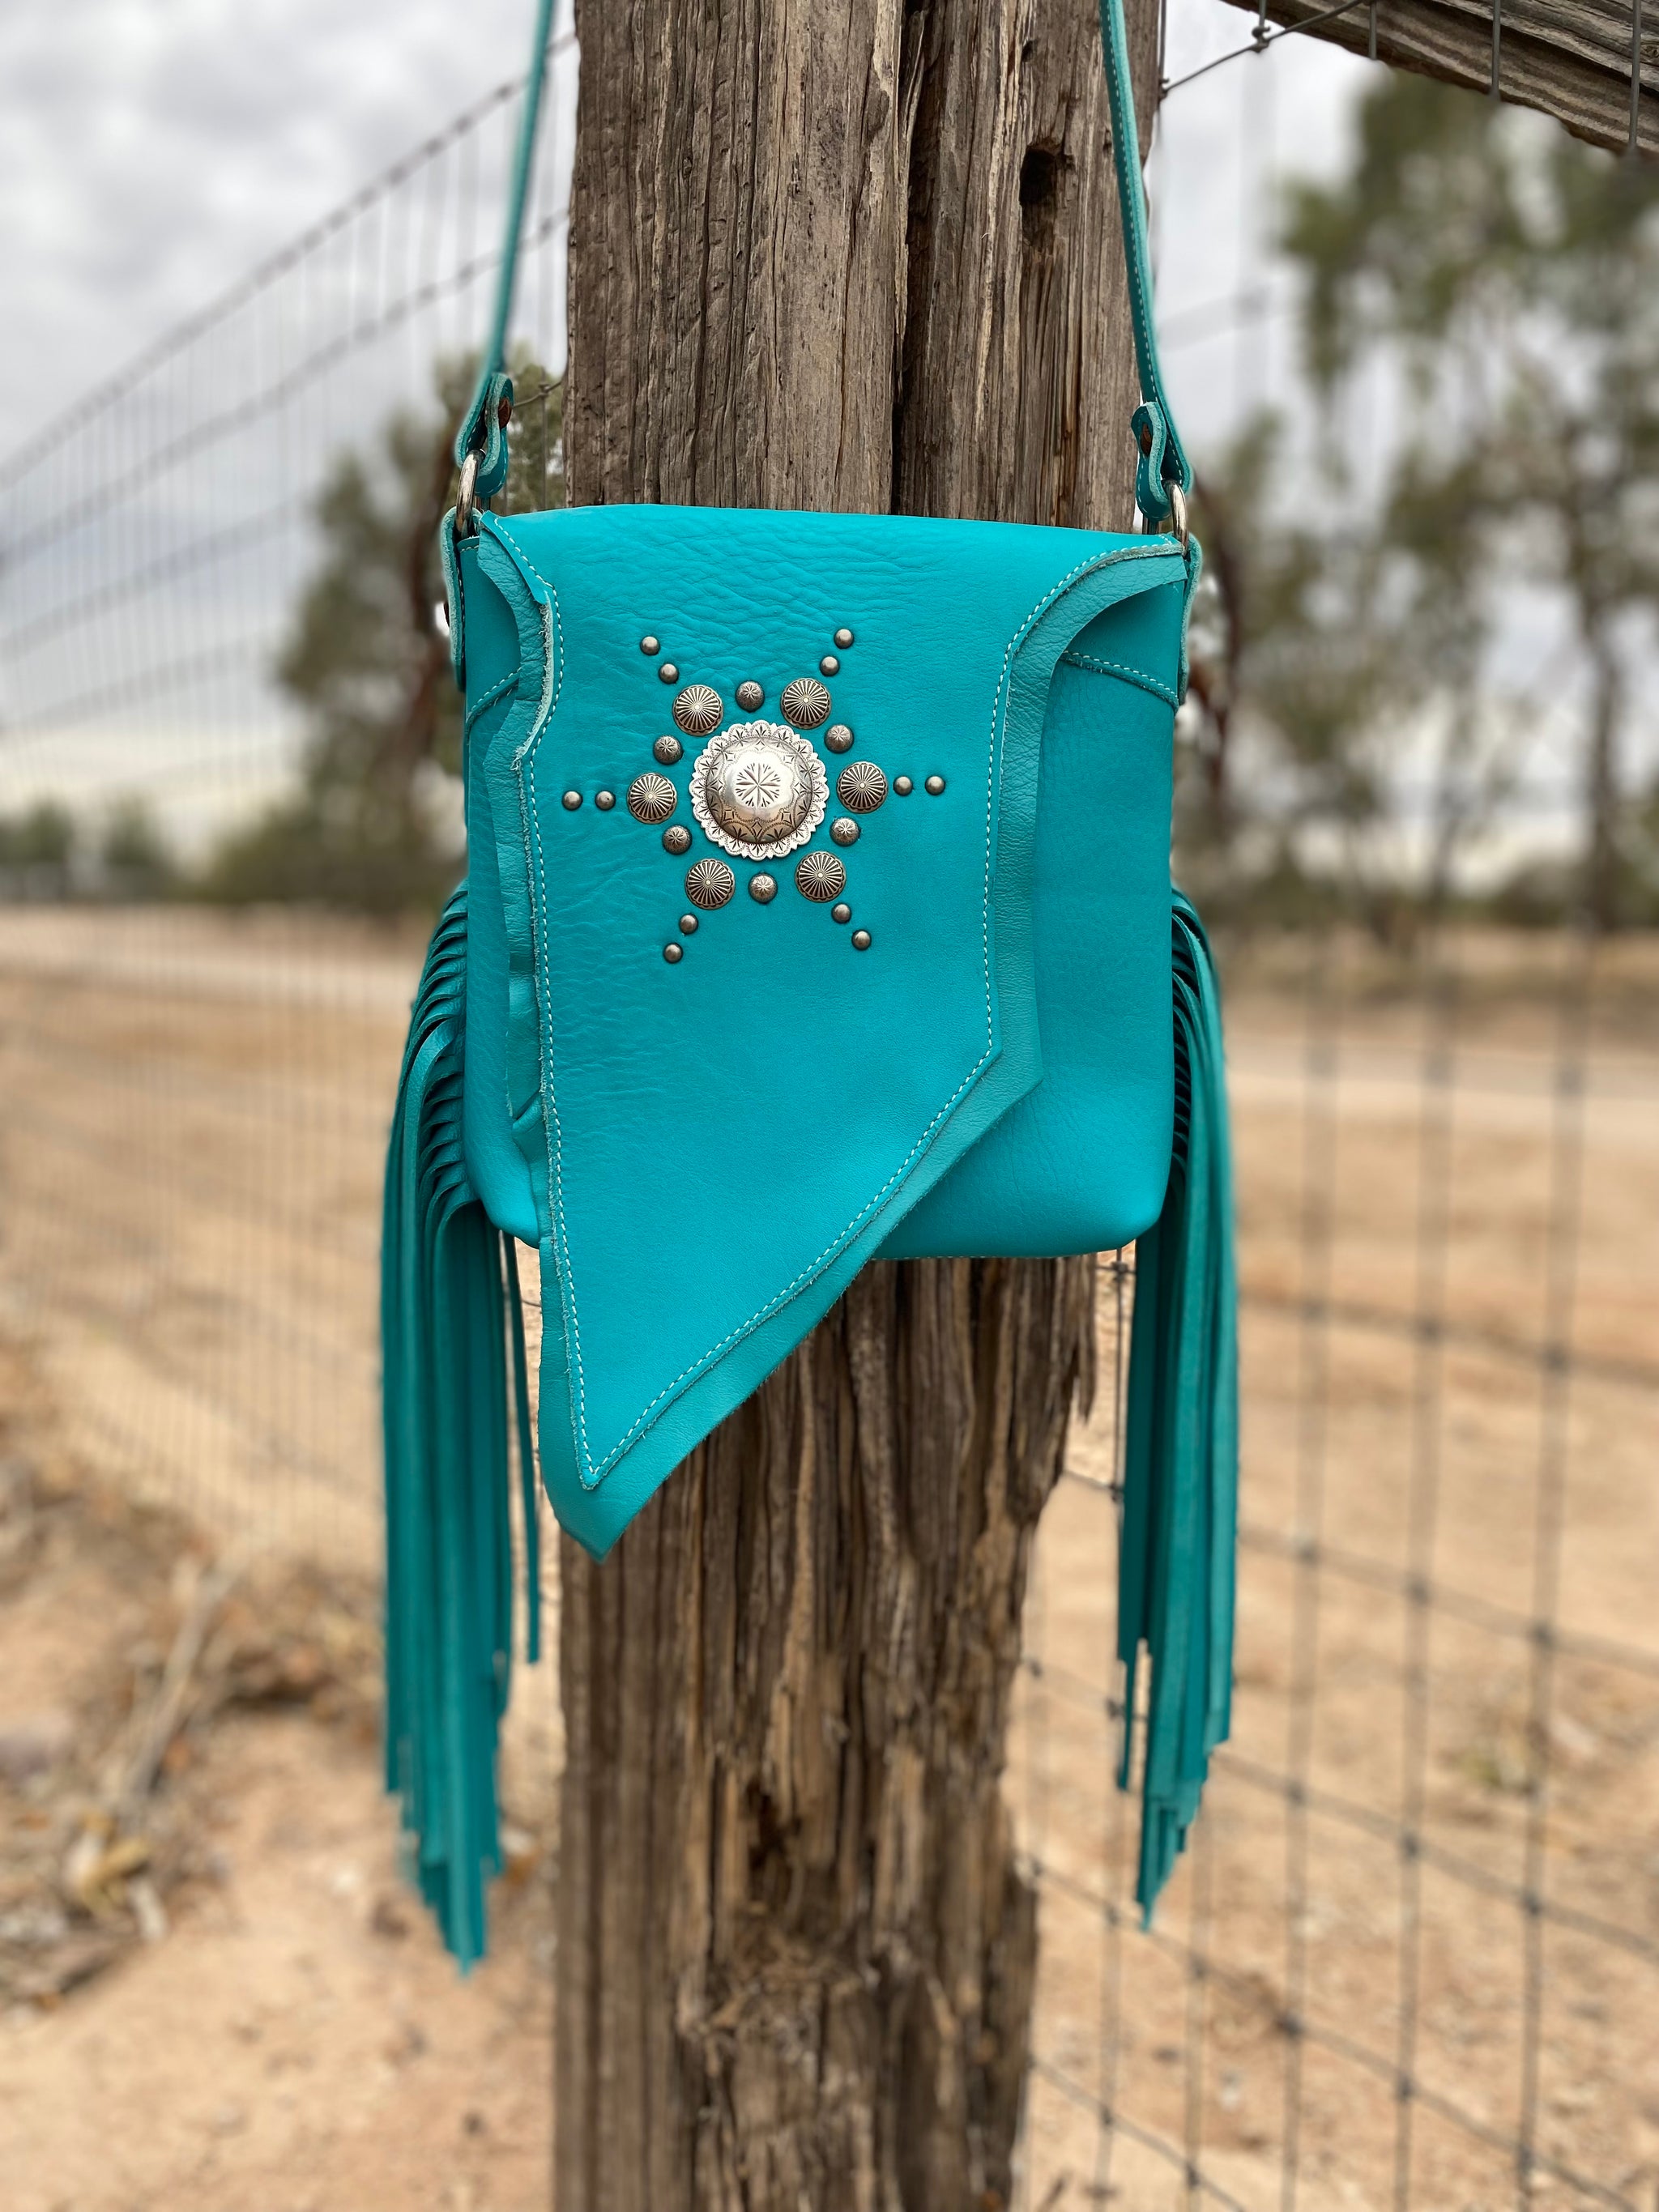 Small Teal Leather Crossbody Purse. Soft Turquoise Leather Bag 